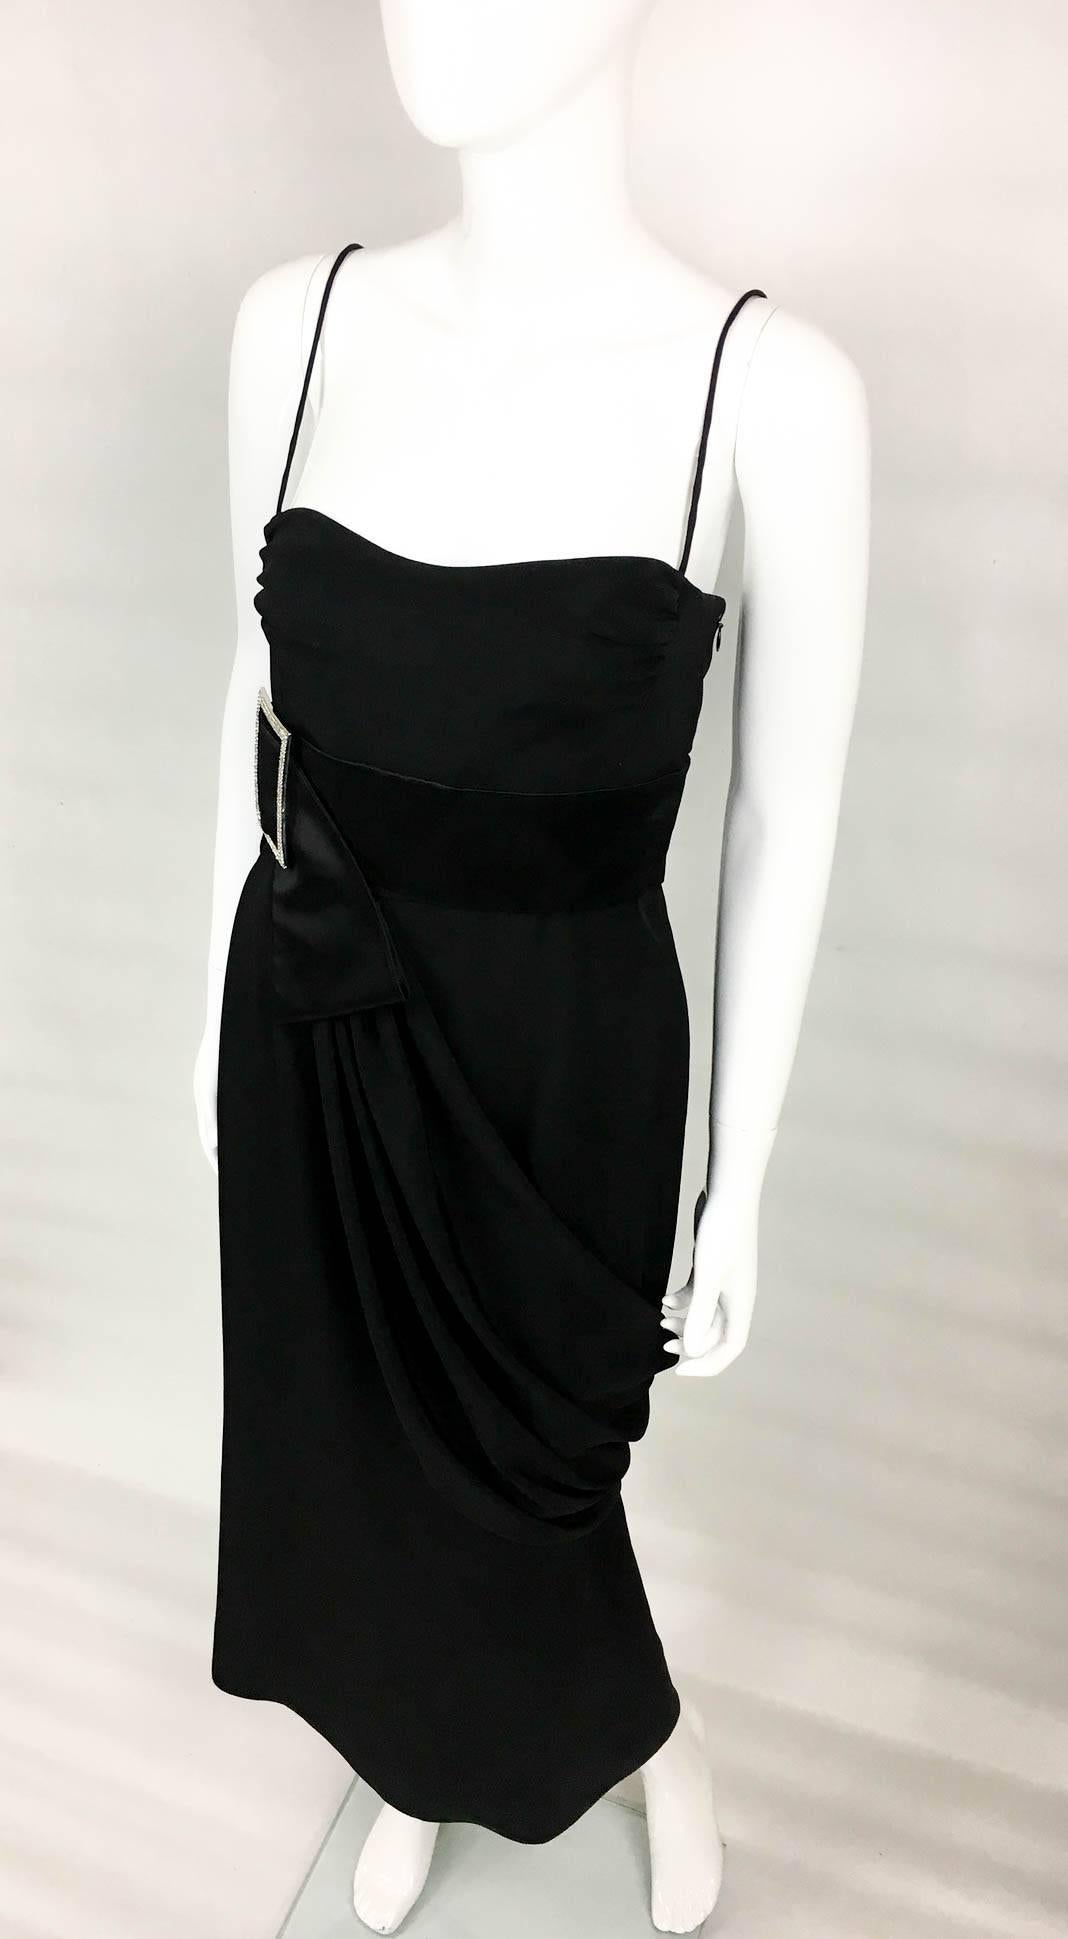 Valentino Silk-Blend Black Evening Dress With Buckle Details - 21st Century In Excellent Condition In London, Chelsea